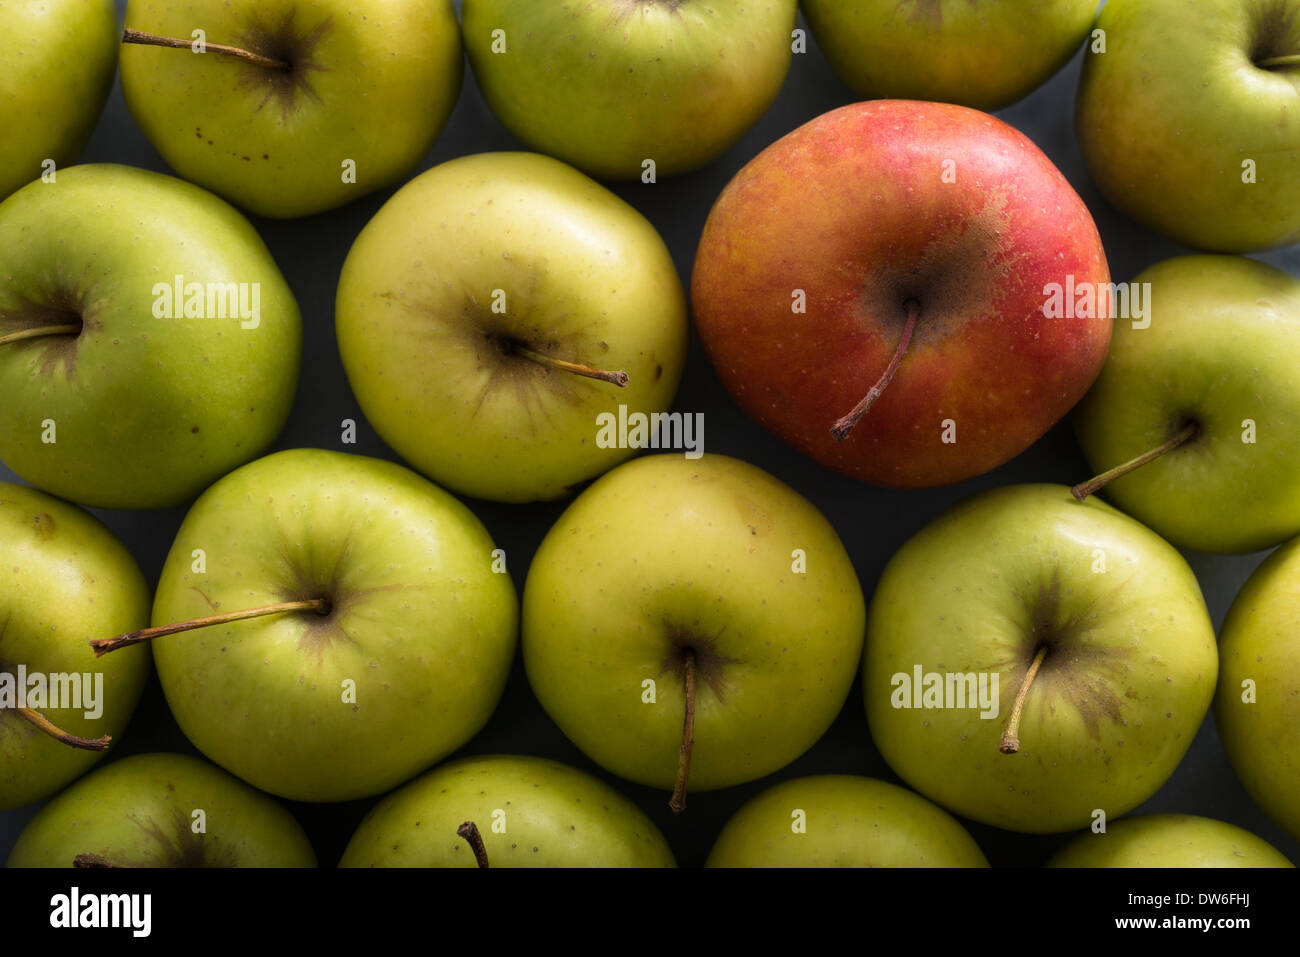 A red apple, green apples. Standing Out From The Crowd Stock Photo